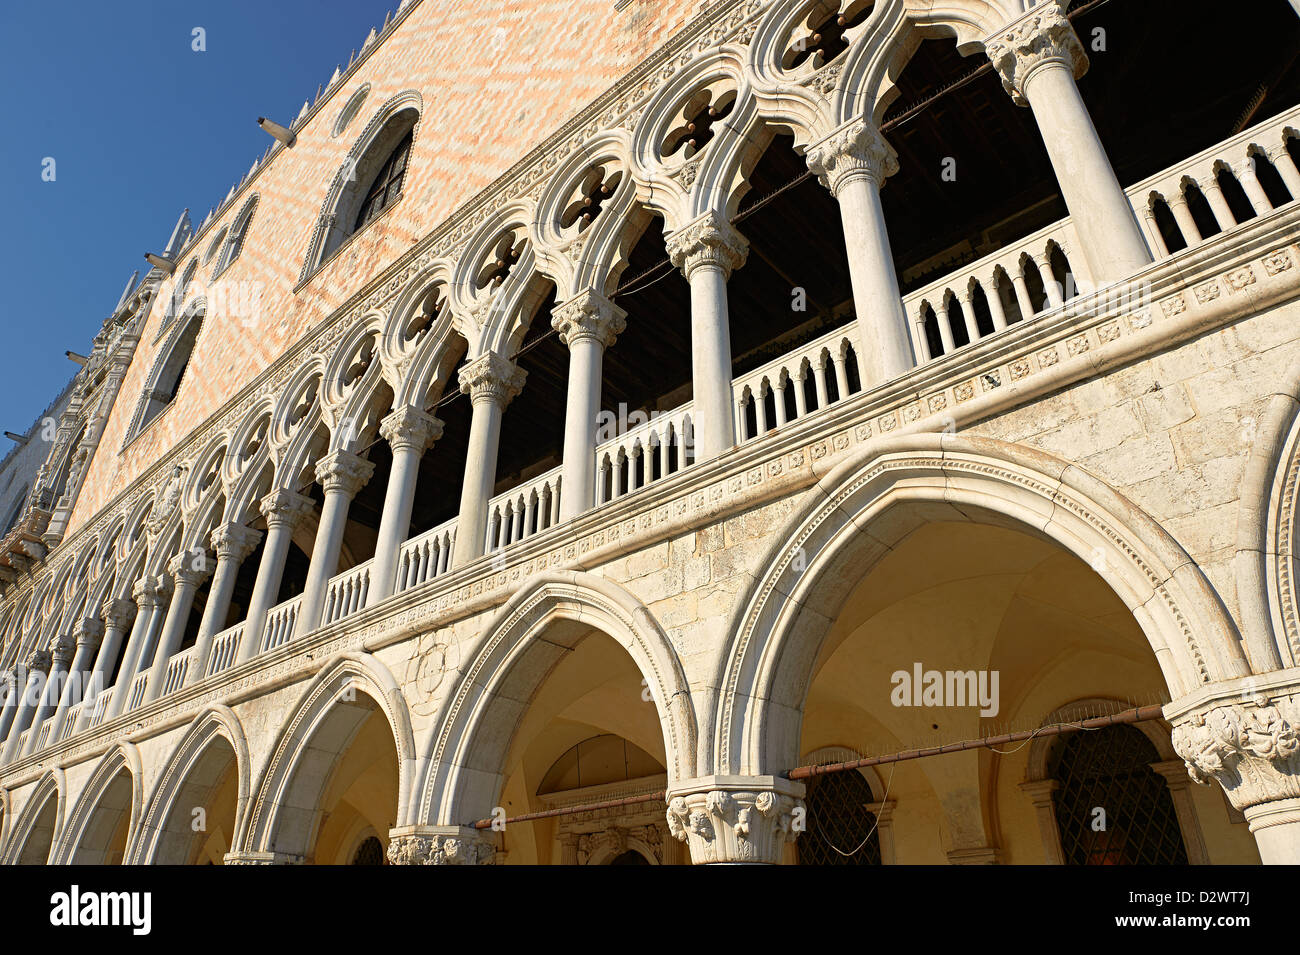 The 14th Century Gothic style eastern facade of The Doge's Palace on St Marks Square, Palazzo Ducale, Venice Italy  Stock Photo